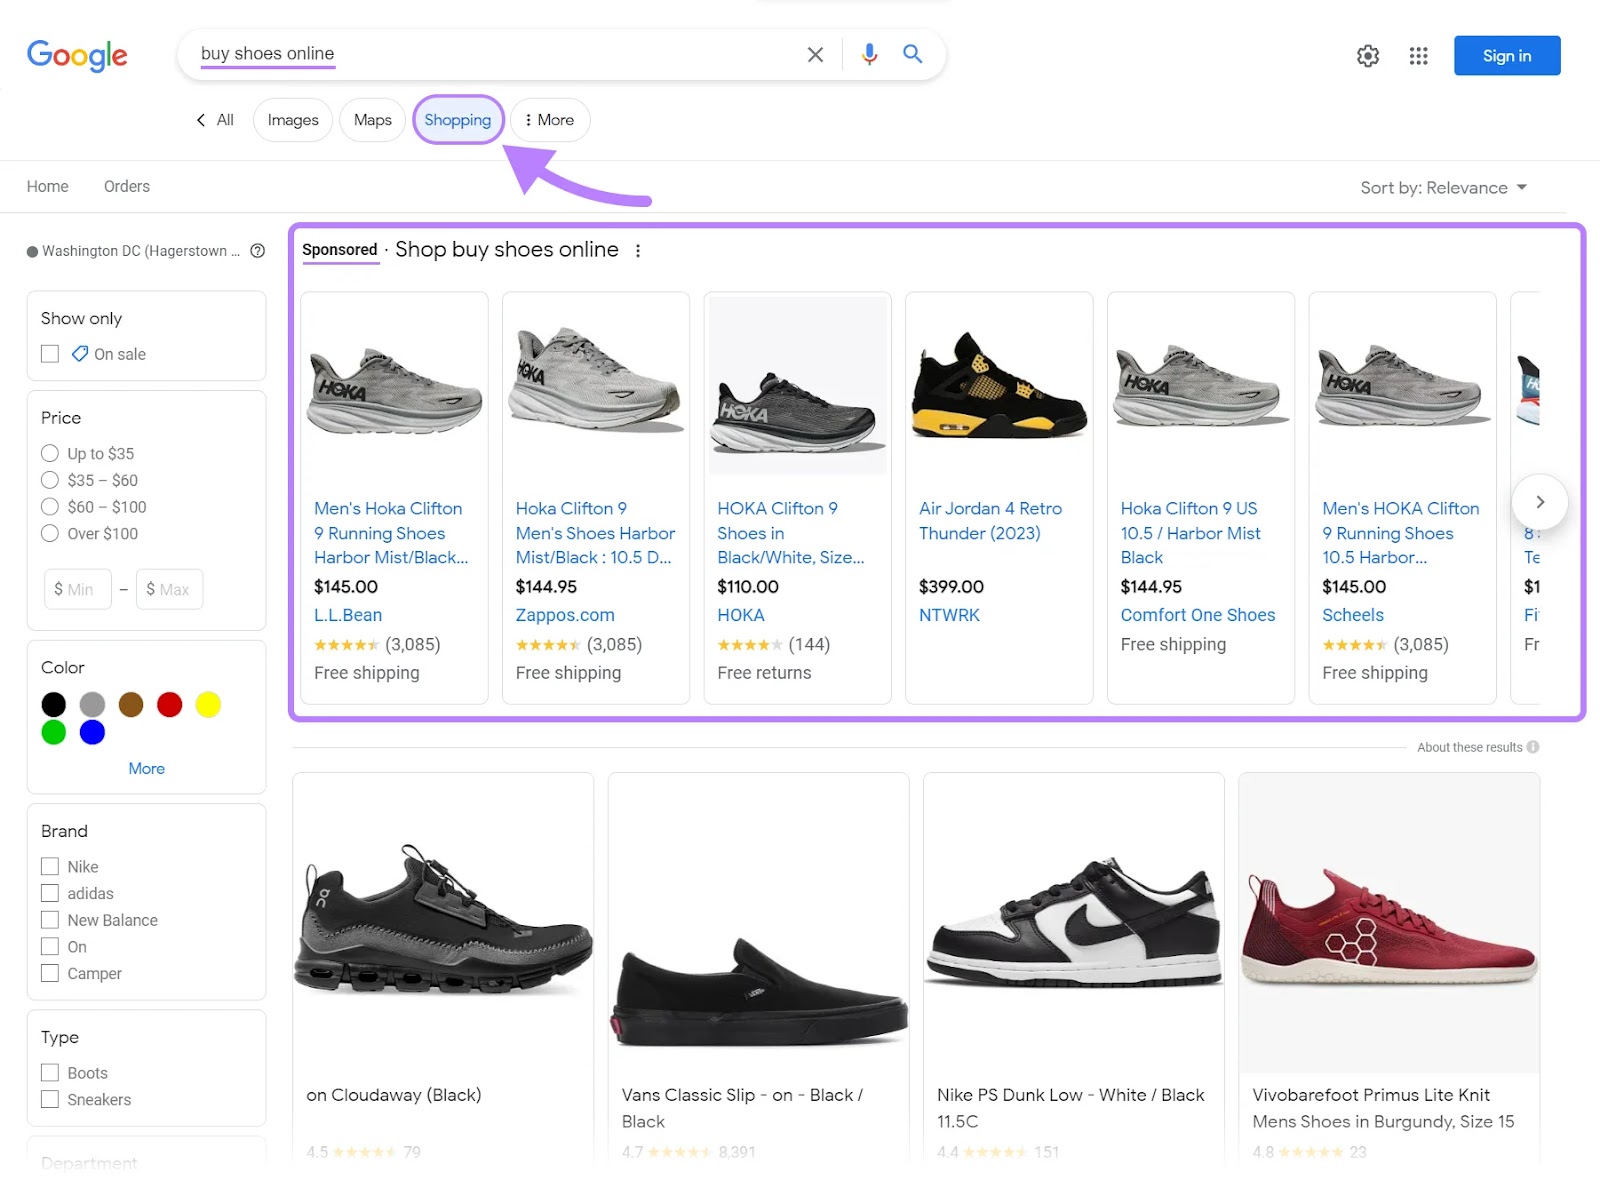 Google's “Shopping” tab for "buy shoes online" query